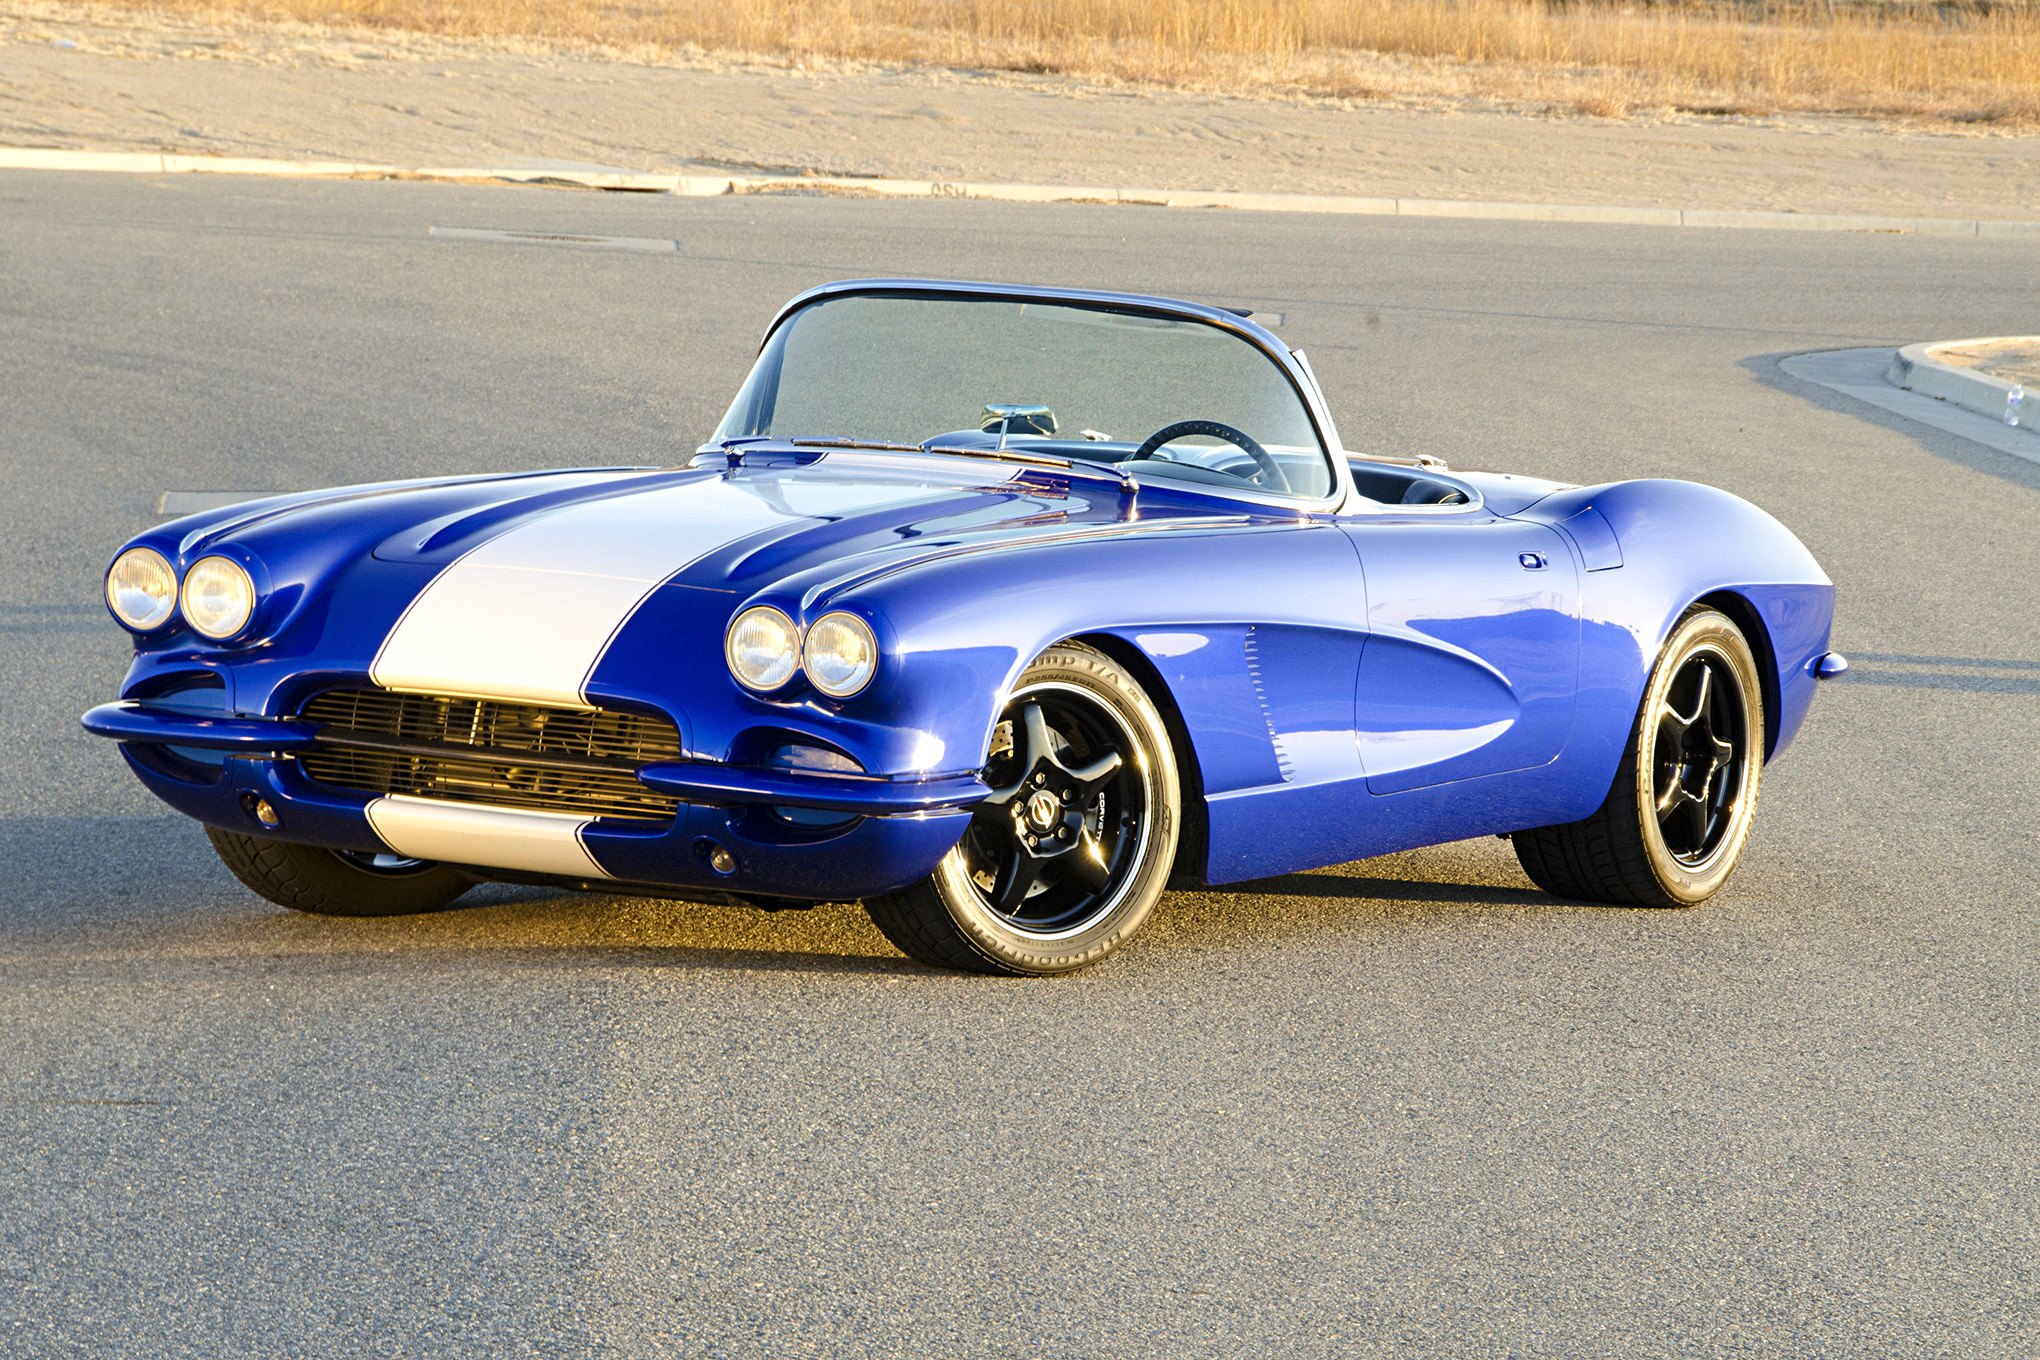 Custom Blue Convertible Chevy Corvette with White Stripes - Photo by Steve Temple